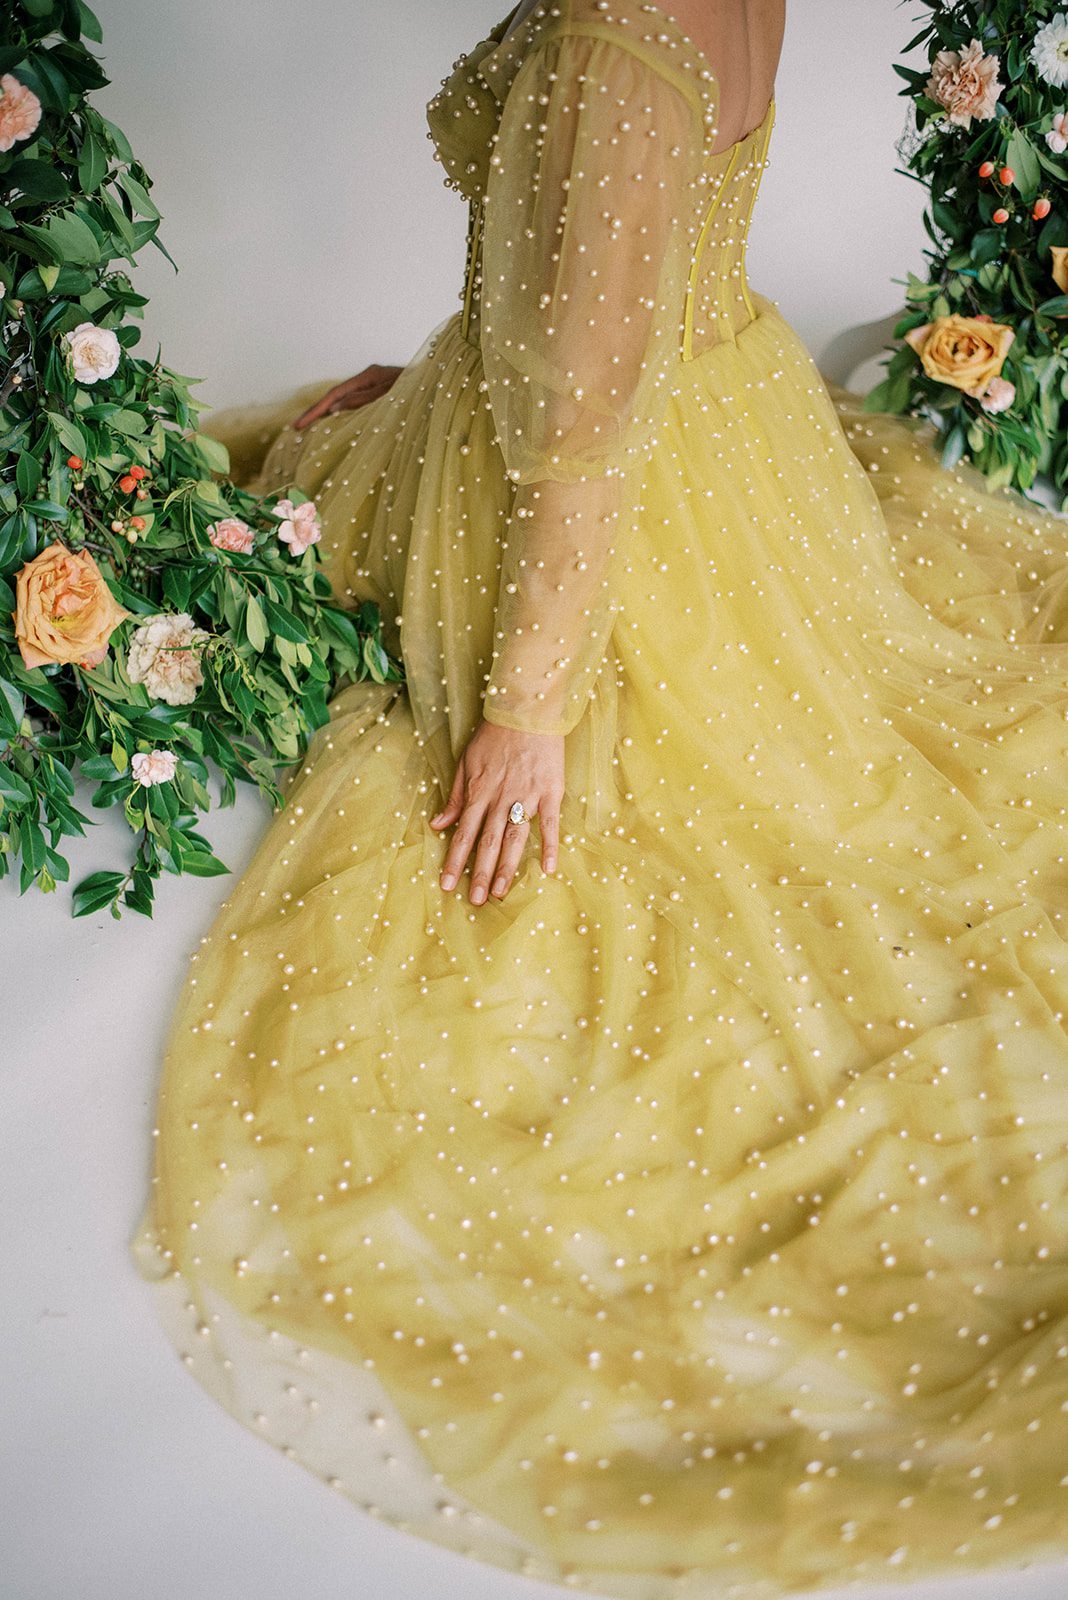 Tampa florida wedding photography with bride in a bright yellow wedding dress sitting on the floor of a studio with florals surrounding her